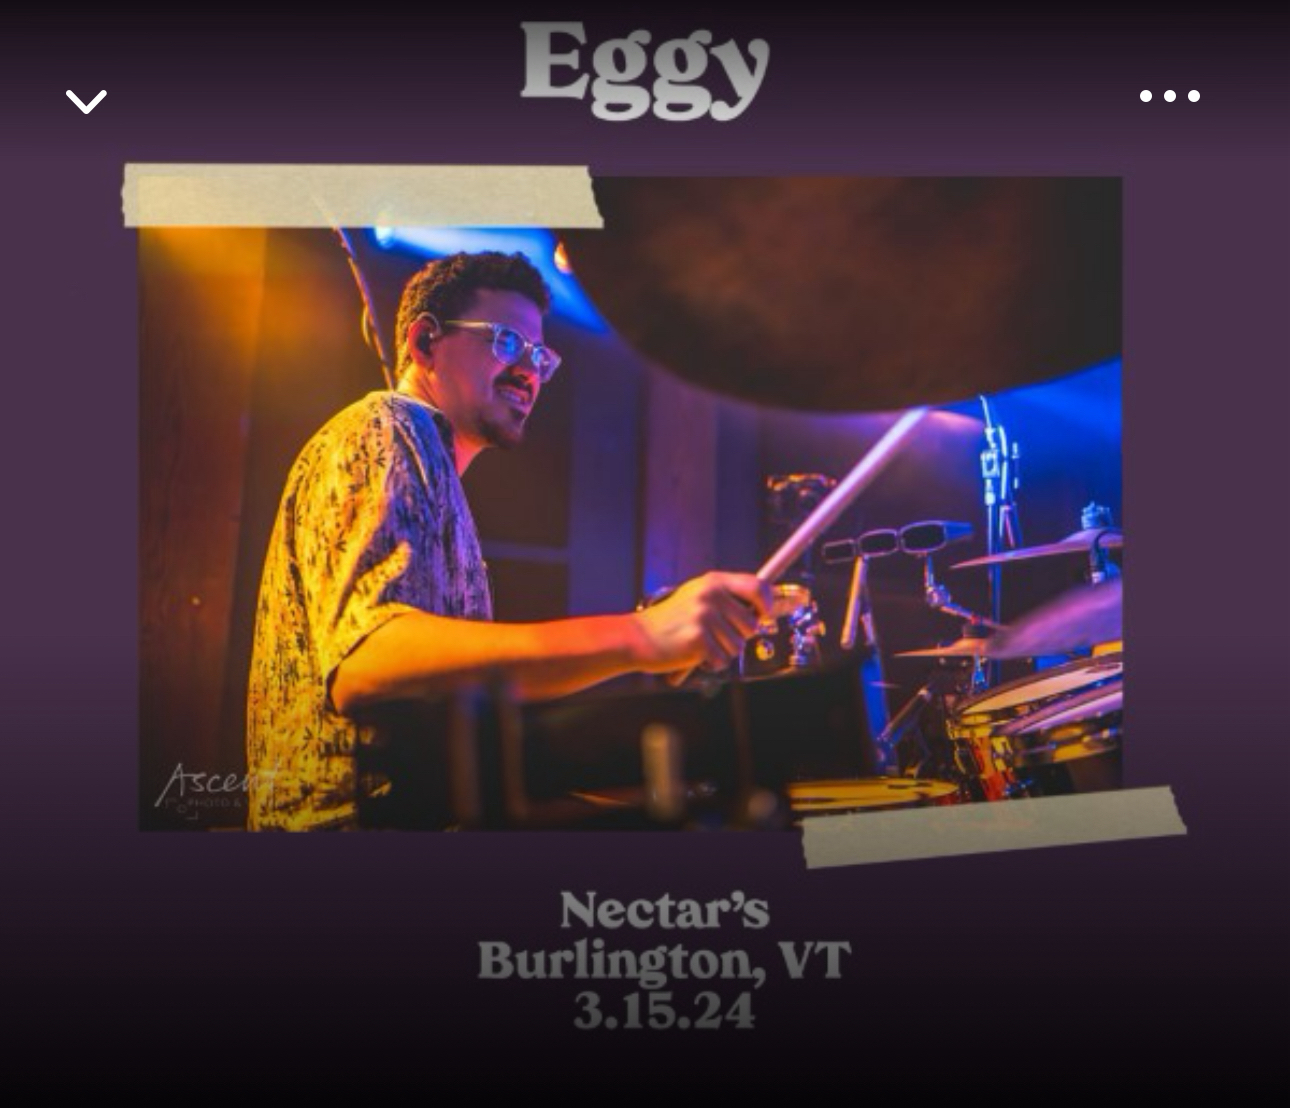 A drummer performing on stage, with the text “Eggy” at the top, and event details stating “Nectar’s Burlington, VT 3.15.24” at the bottom.